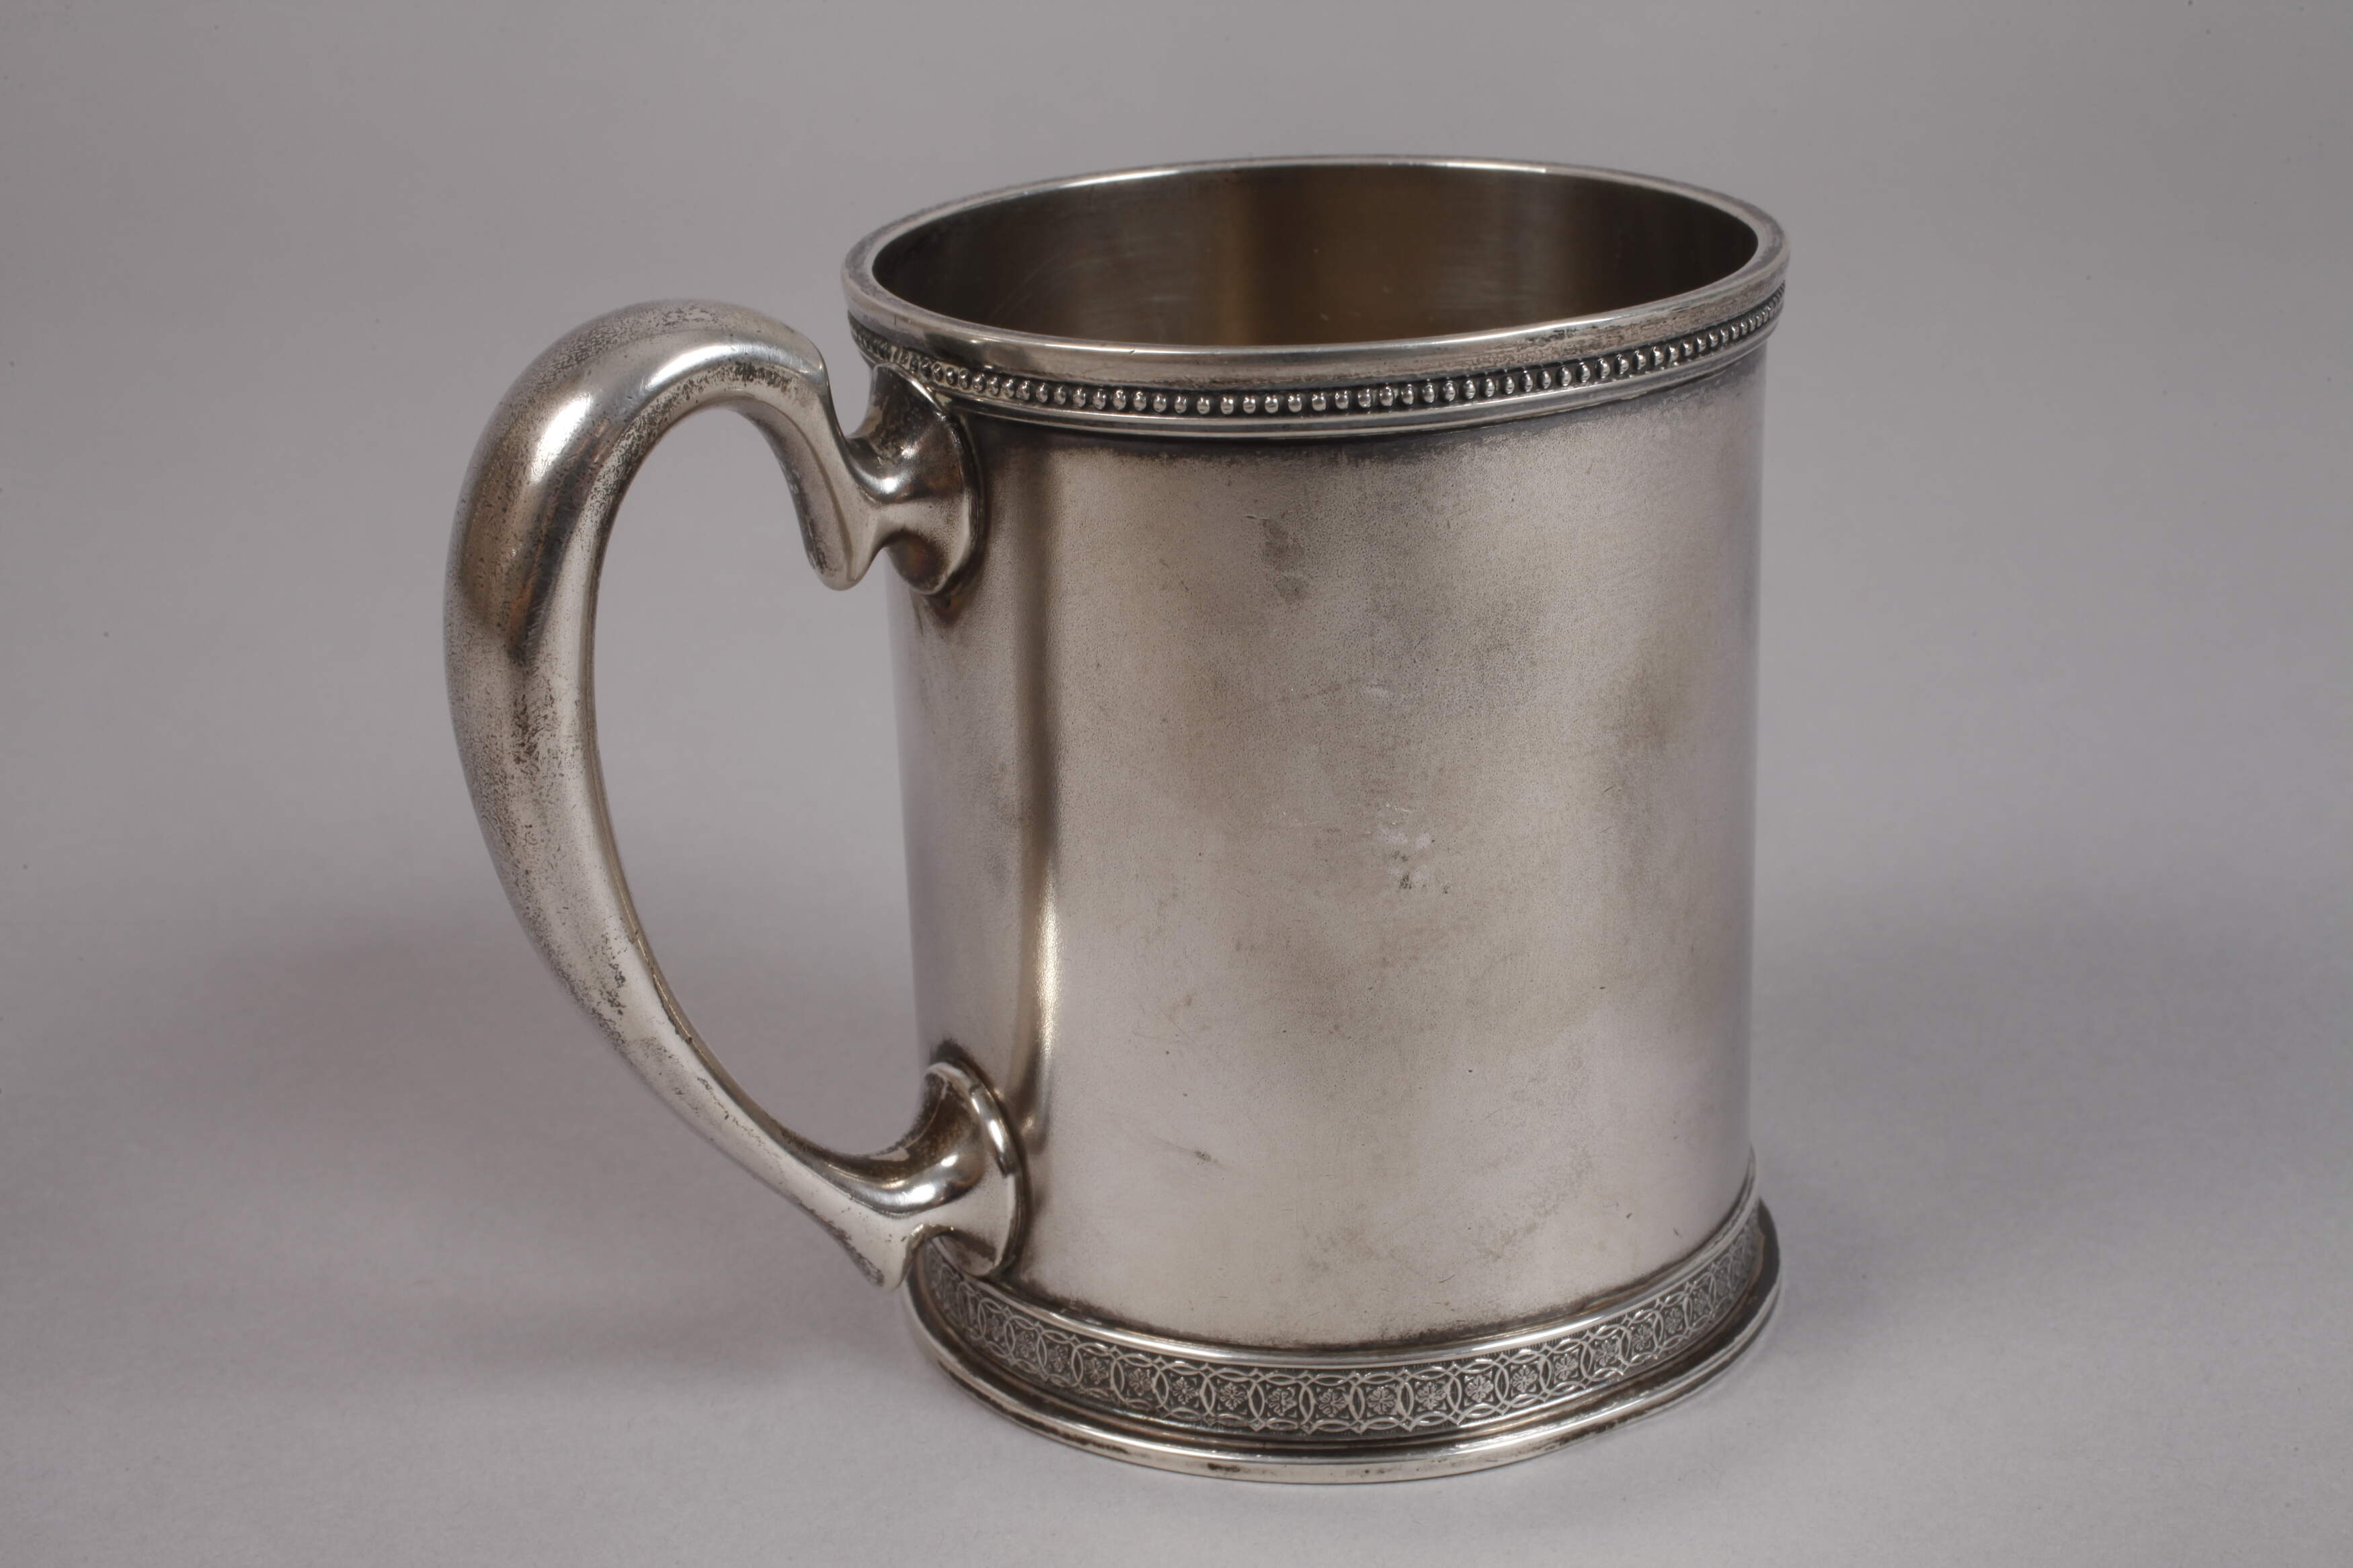 Tiffany Silver Cup - Image 2 of 4